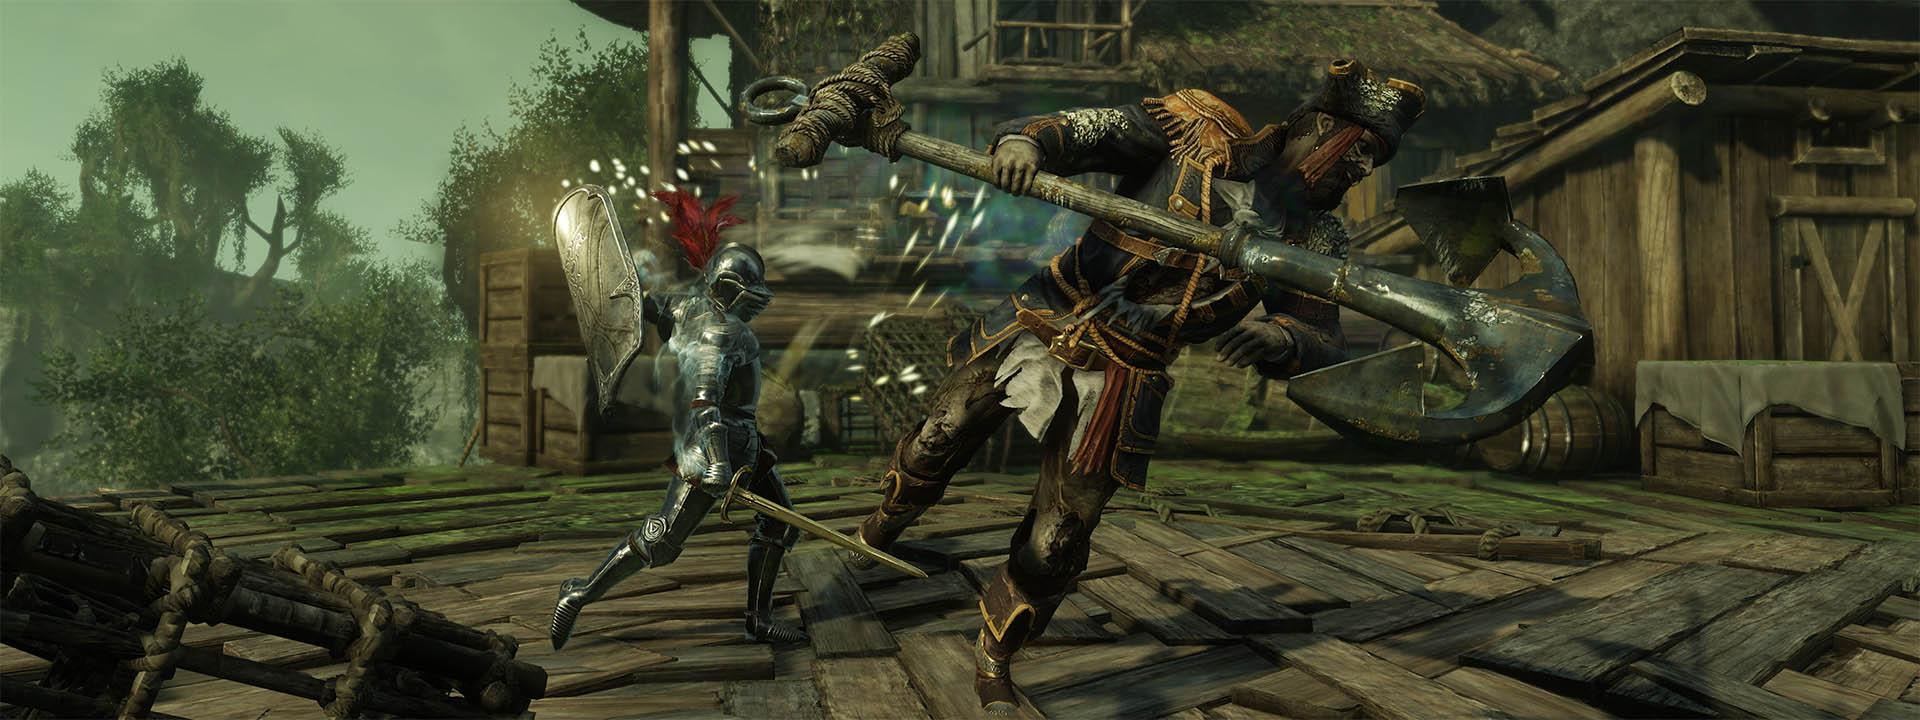 A screenshot showing a player character wielding the new tower shield in combat.